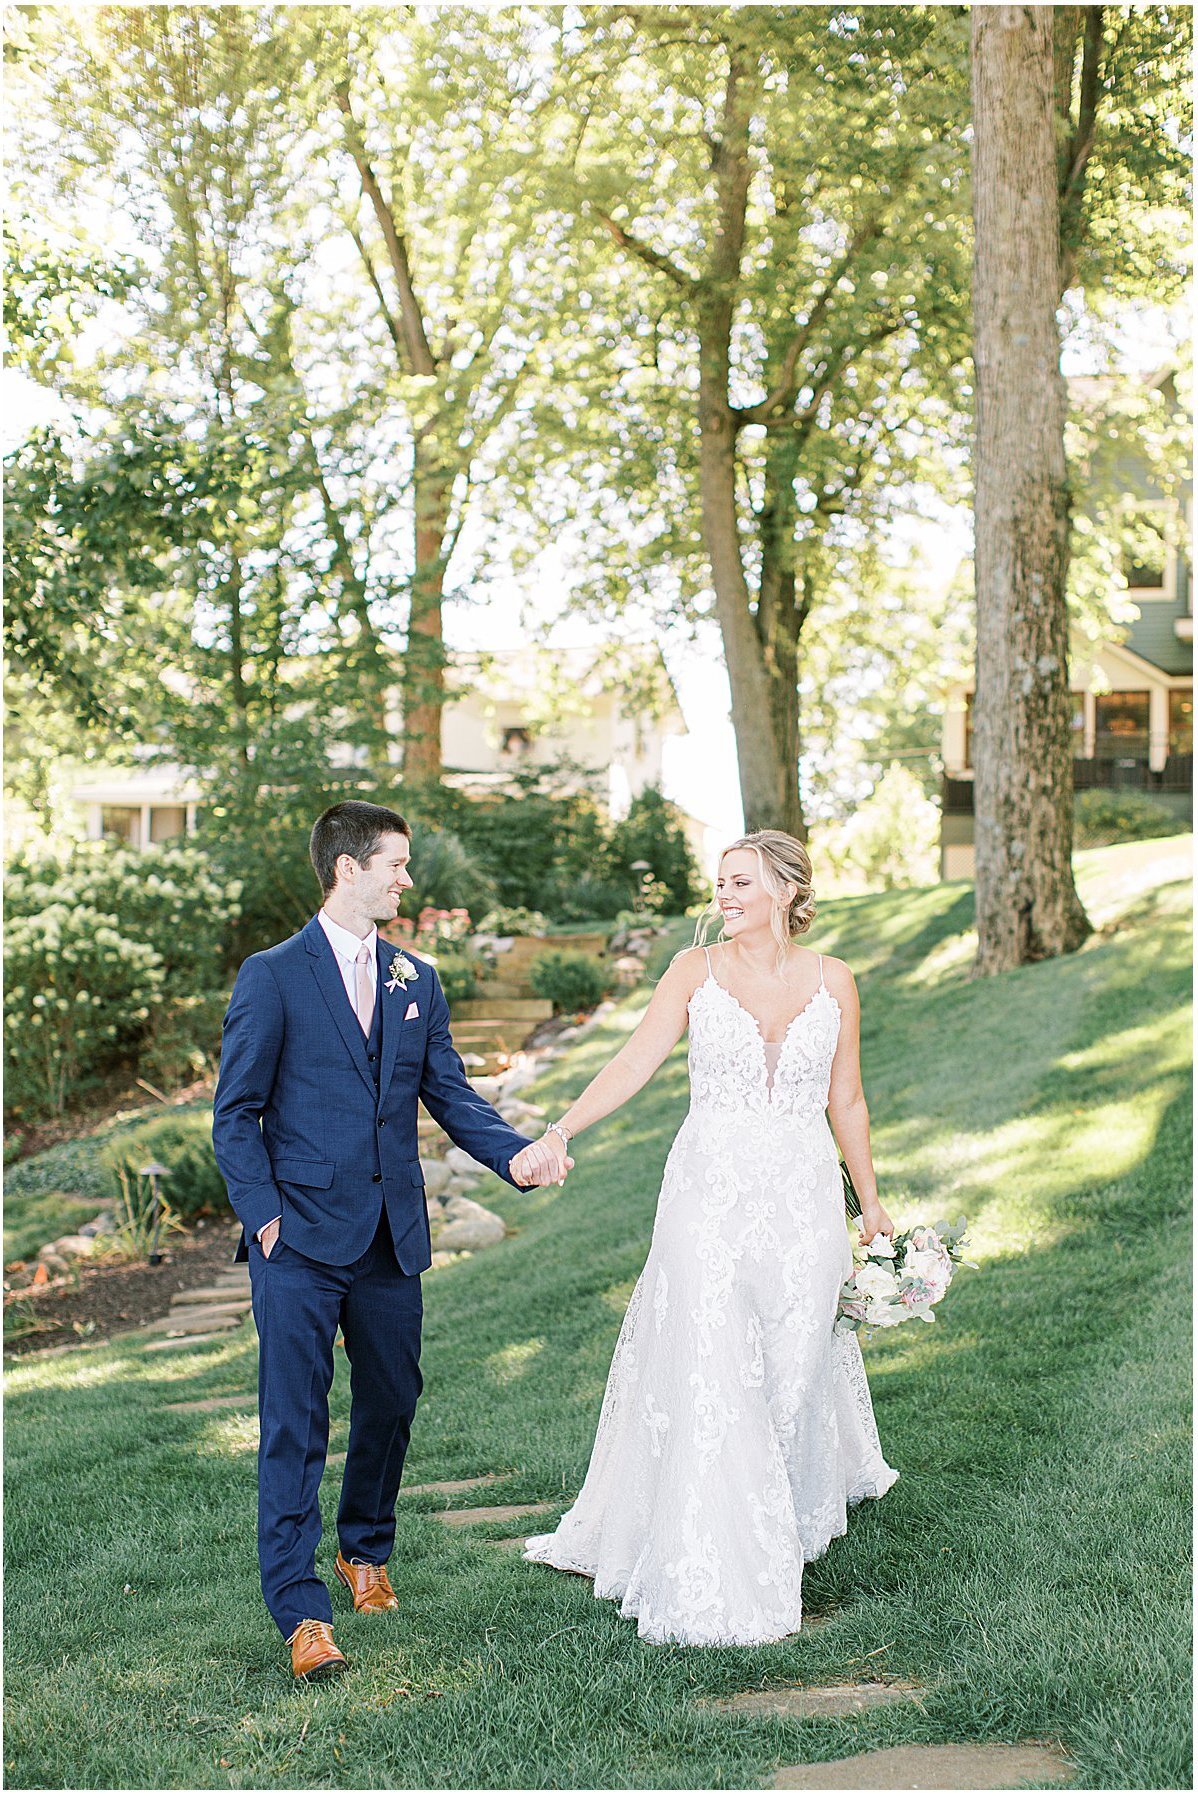 ivory-and-beau-bride-michelle-wedding-dress-bridal-gown-wedding-gown-bridal-shop-bridal-boutique-bride-bridal-shopping-real-bride-maggie-sottero-Lake-Wawasee-Wedding-with-Sami-Renee-Photography_0021.jpg